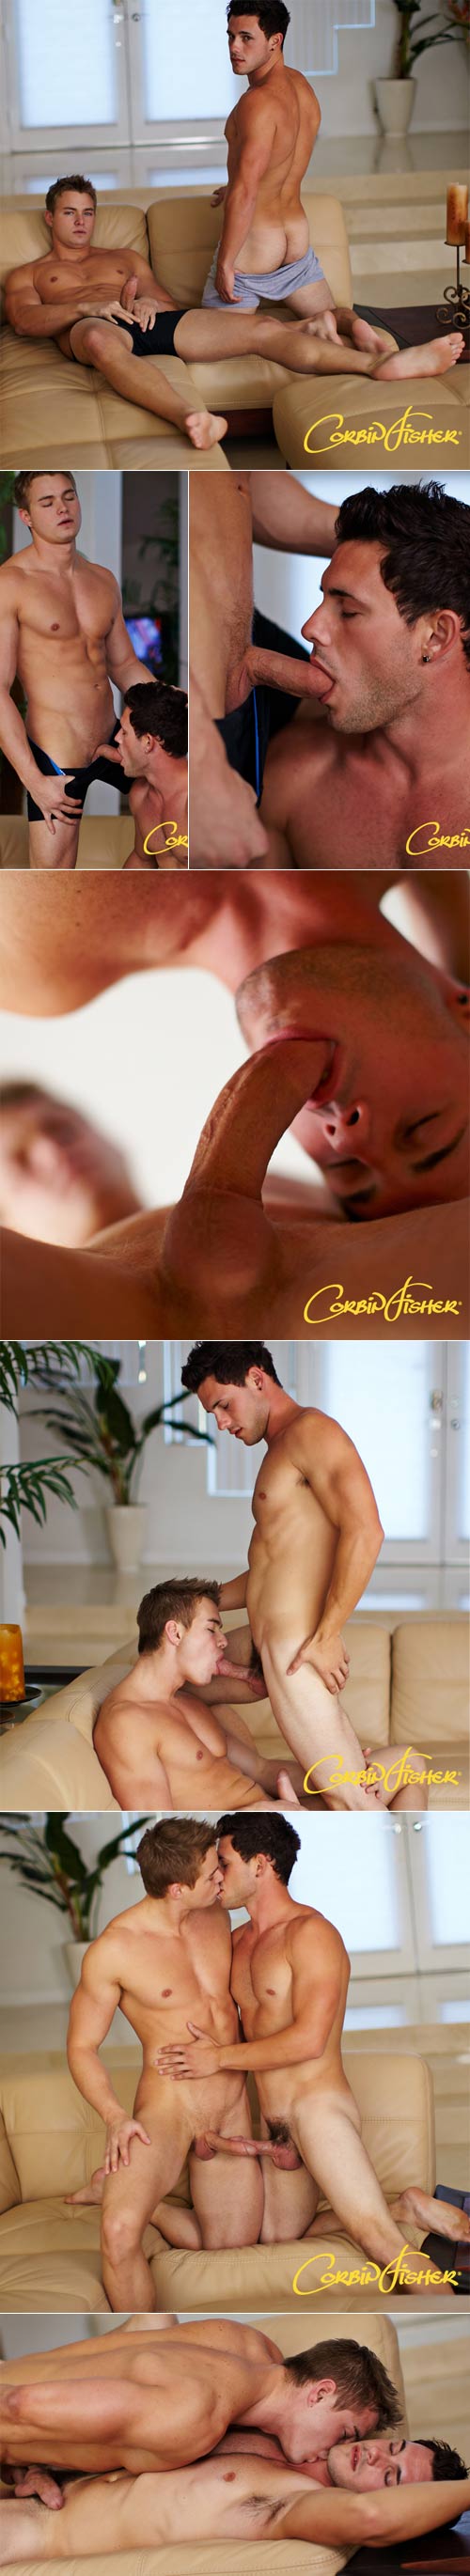 Connor & Sean's Post-Workout Fuck at CorbinFisher